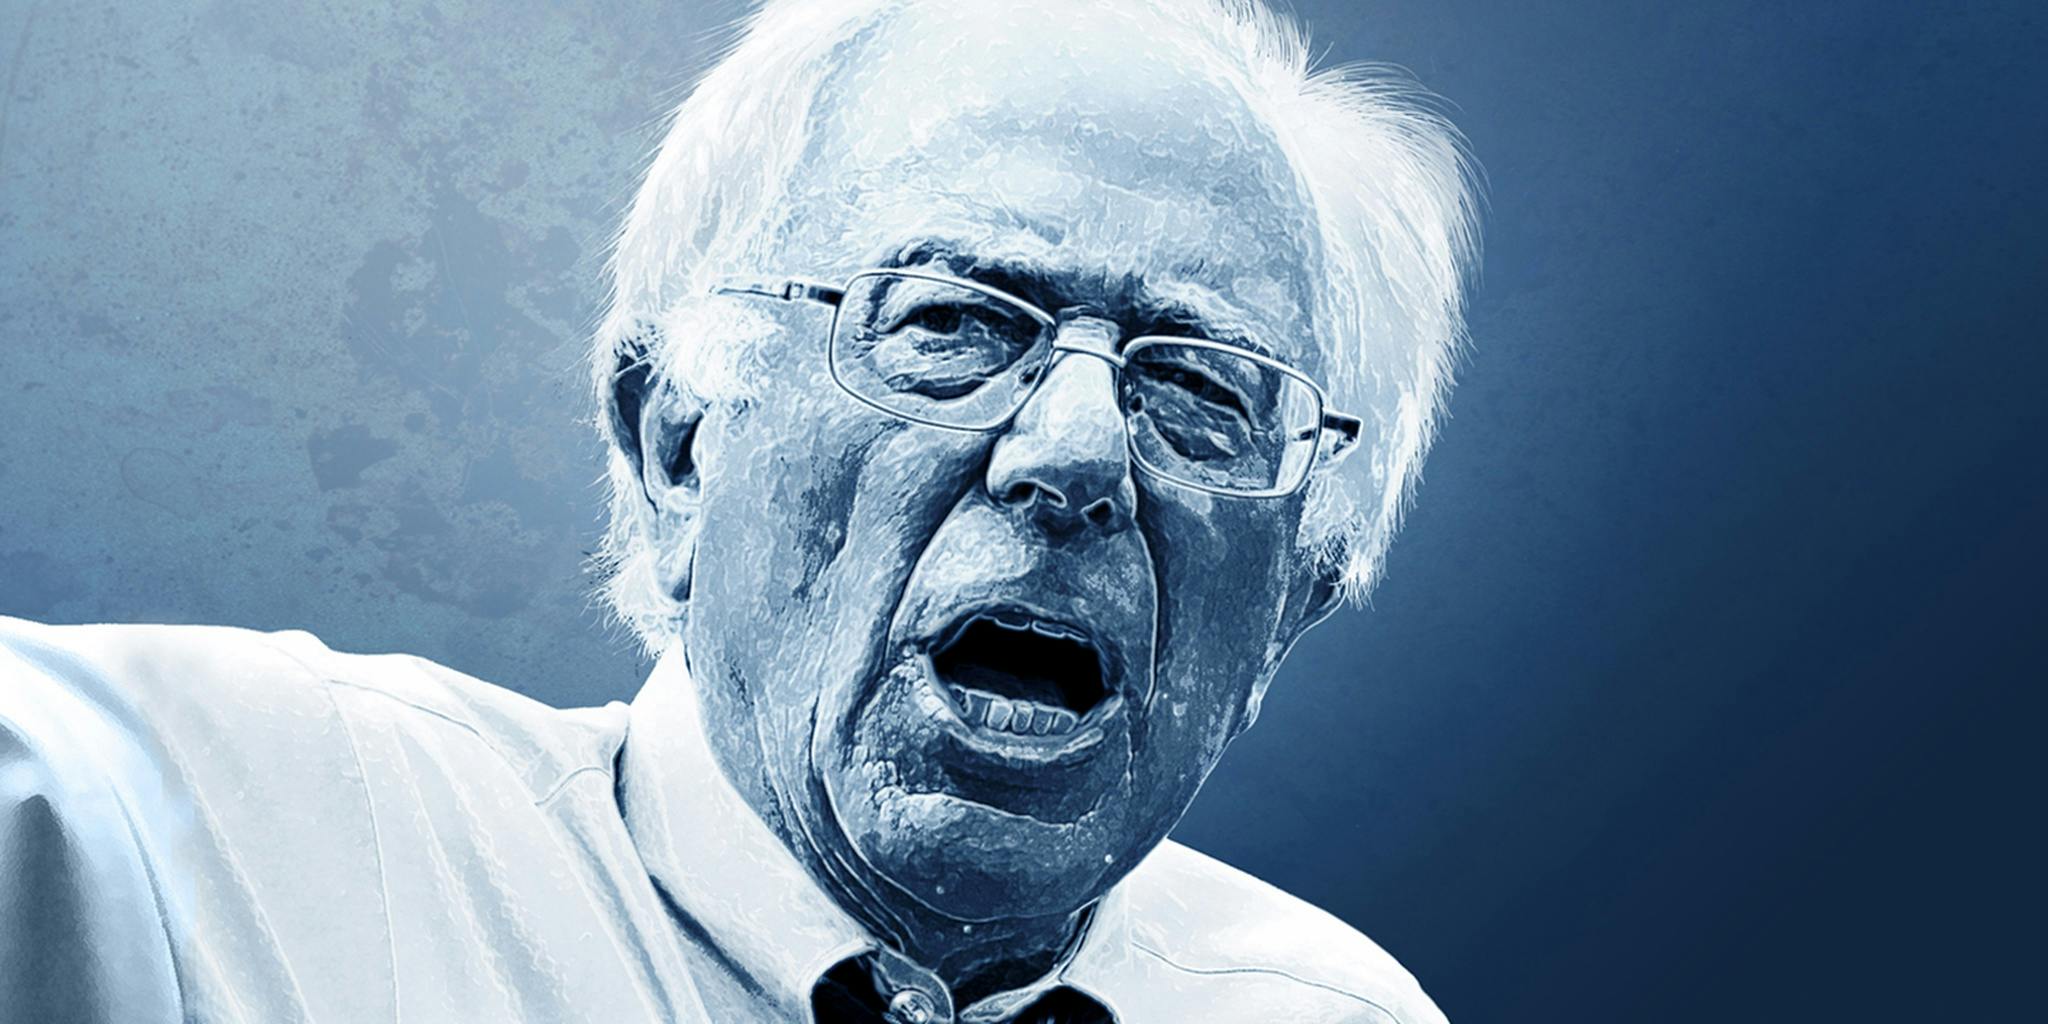 Bernie Sanders Tops Hillary Clinton By 9 In New Hampshire Gains In Iowa The Daily Dot 